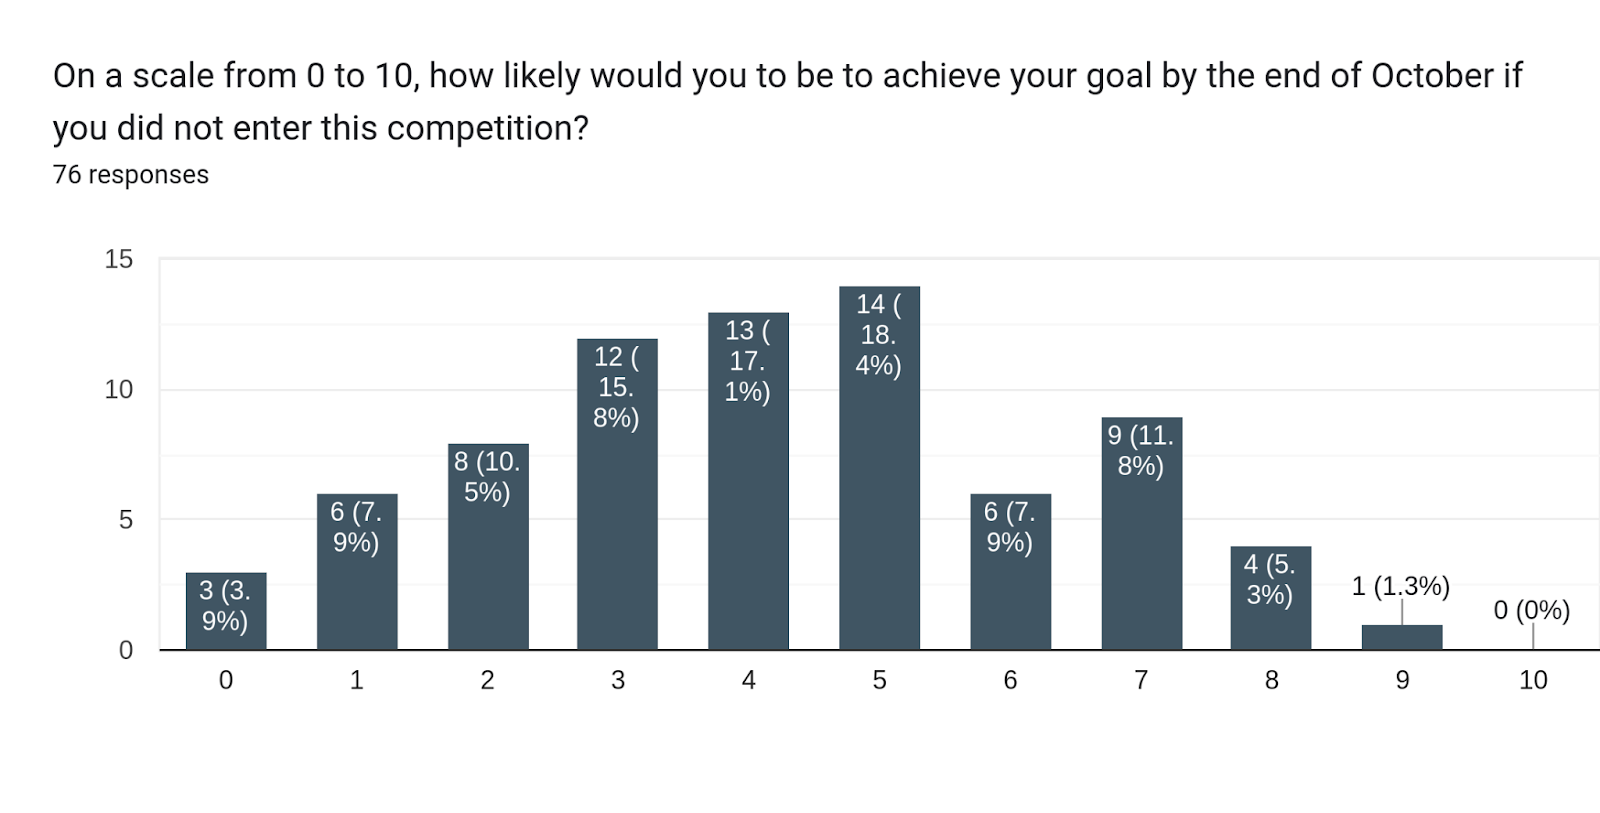 Forms response chart. Question title: On a scale from 0 to 10, how likely would you to be to achieve your goal by the end of October if you did not enter this competition?. Number of responses: 76 responses.